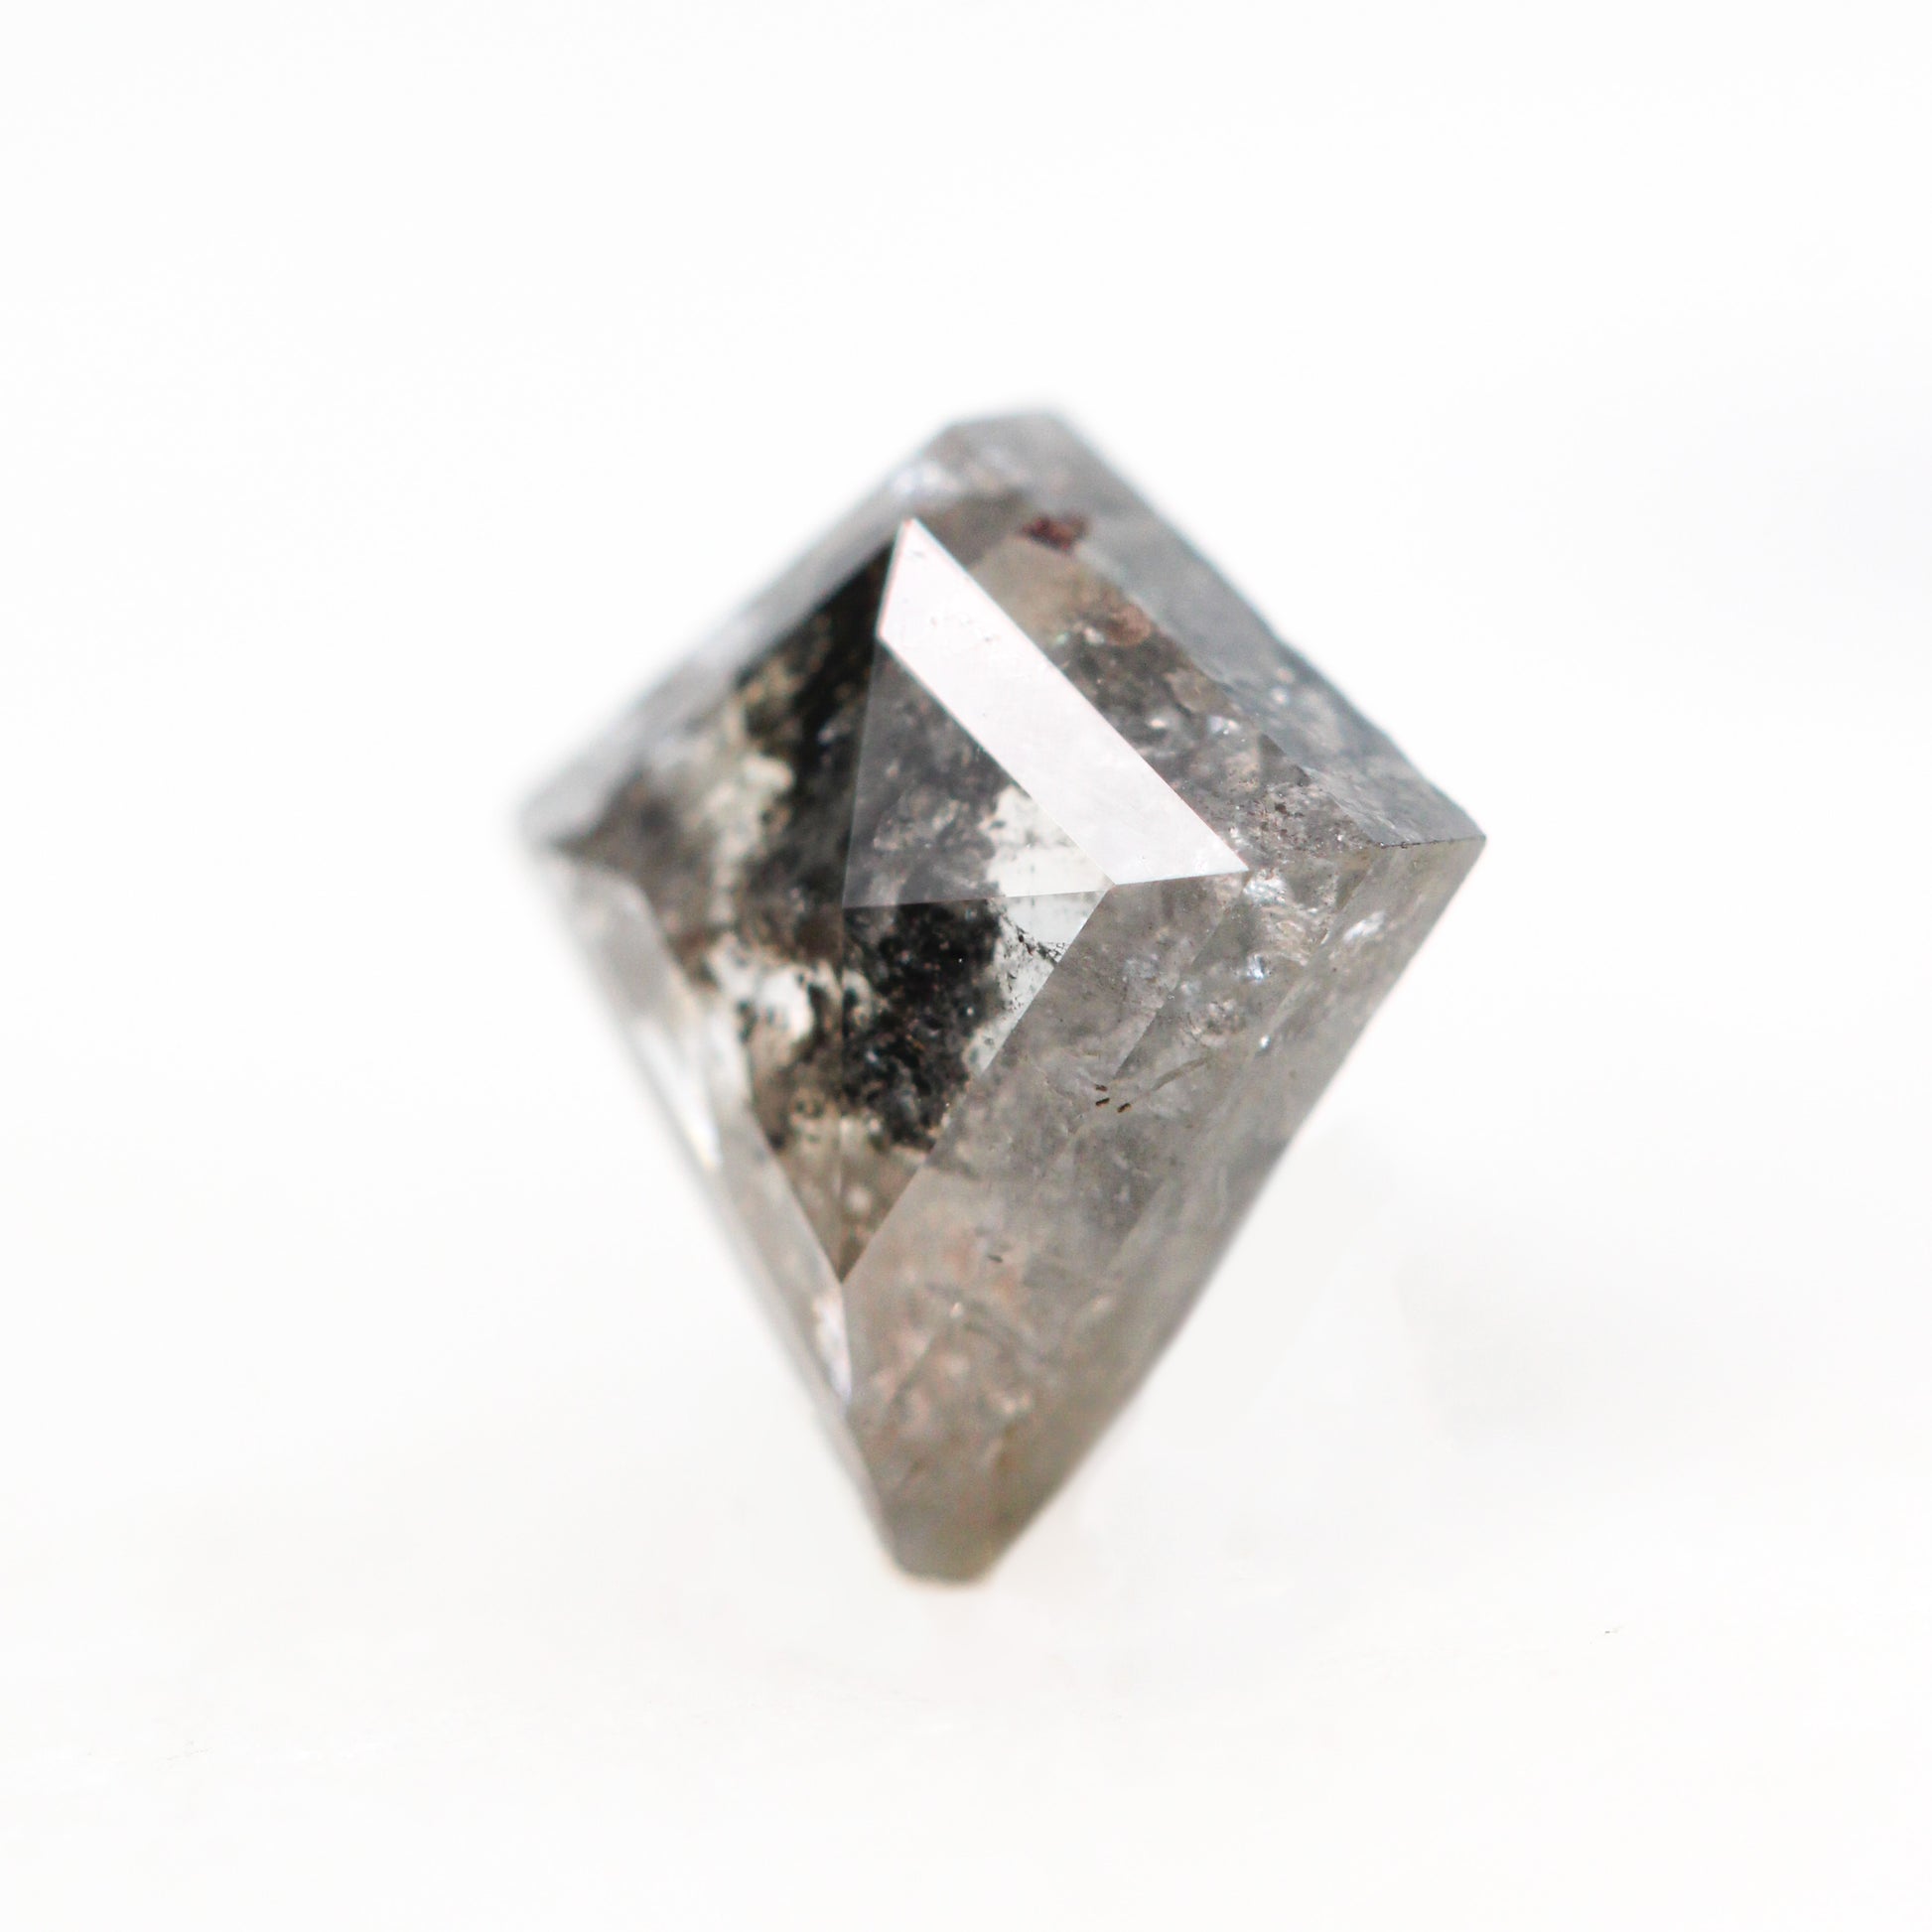 1.04 Carat Stormy Gray Salt and Pepper Kite Diamond for Custom Work - Inventory Code SGK104 - Midwinter Co. Alternative Bridal Rings and Modern Fine Jewelry